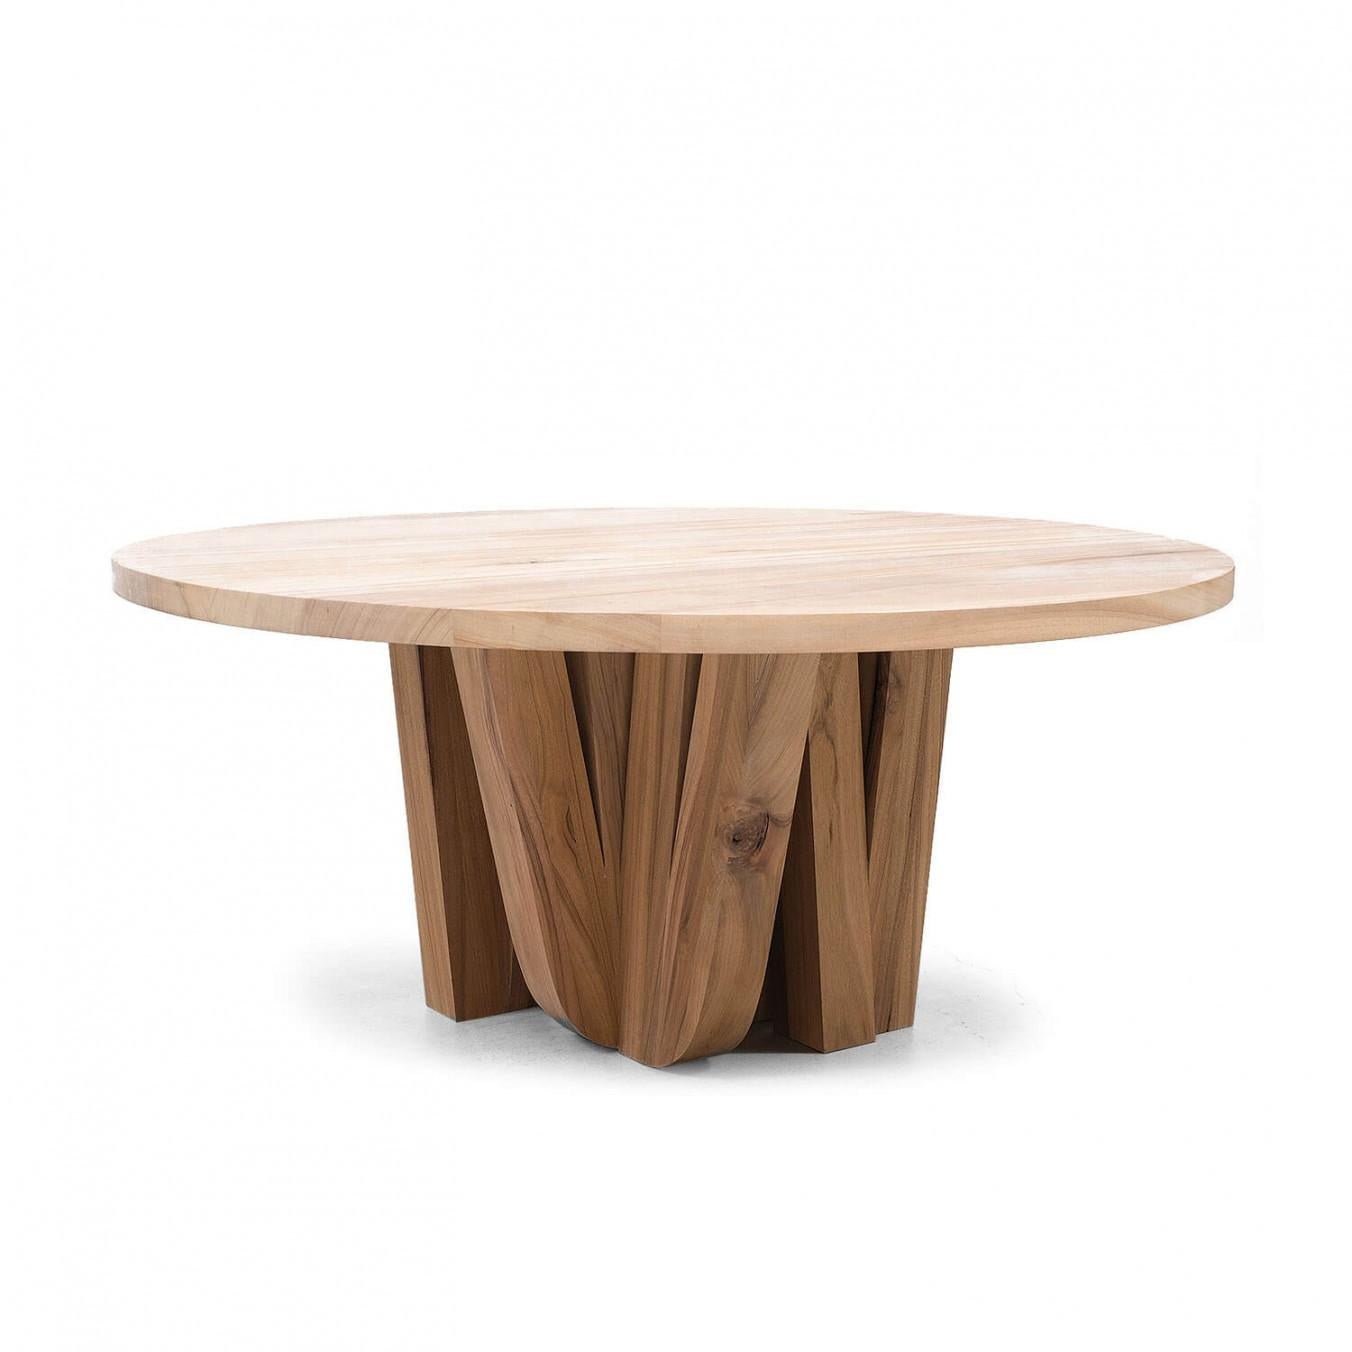 Contemporary round dining table in african walnut - Zoumey by Arno Declercq

Dimensions: diameter 160 x height 75 cm
Material: African walnut

A forest of table legs made out of 16 pieces of African walnut.
A dining table for 6 persons

Made